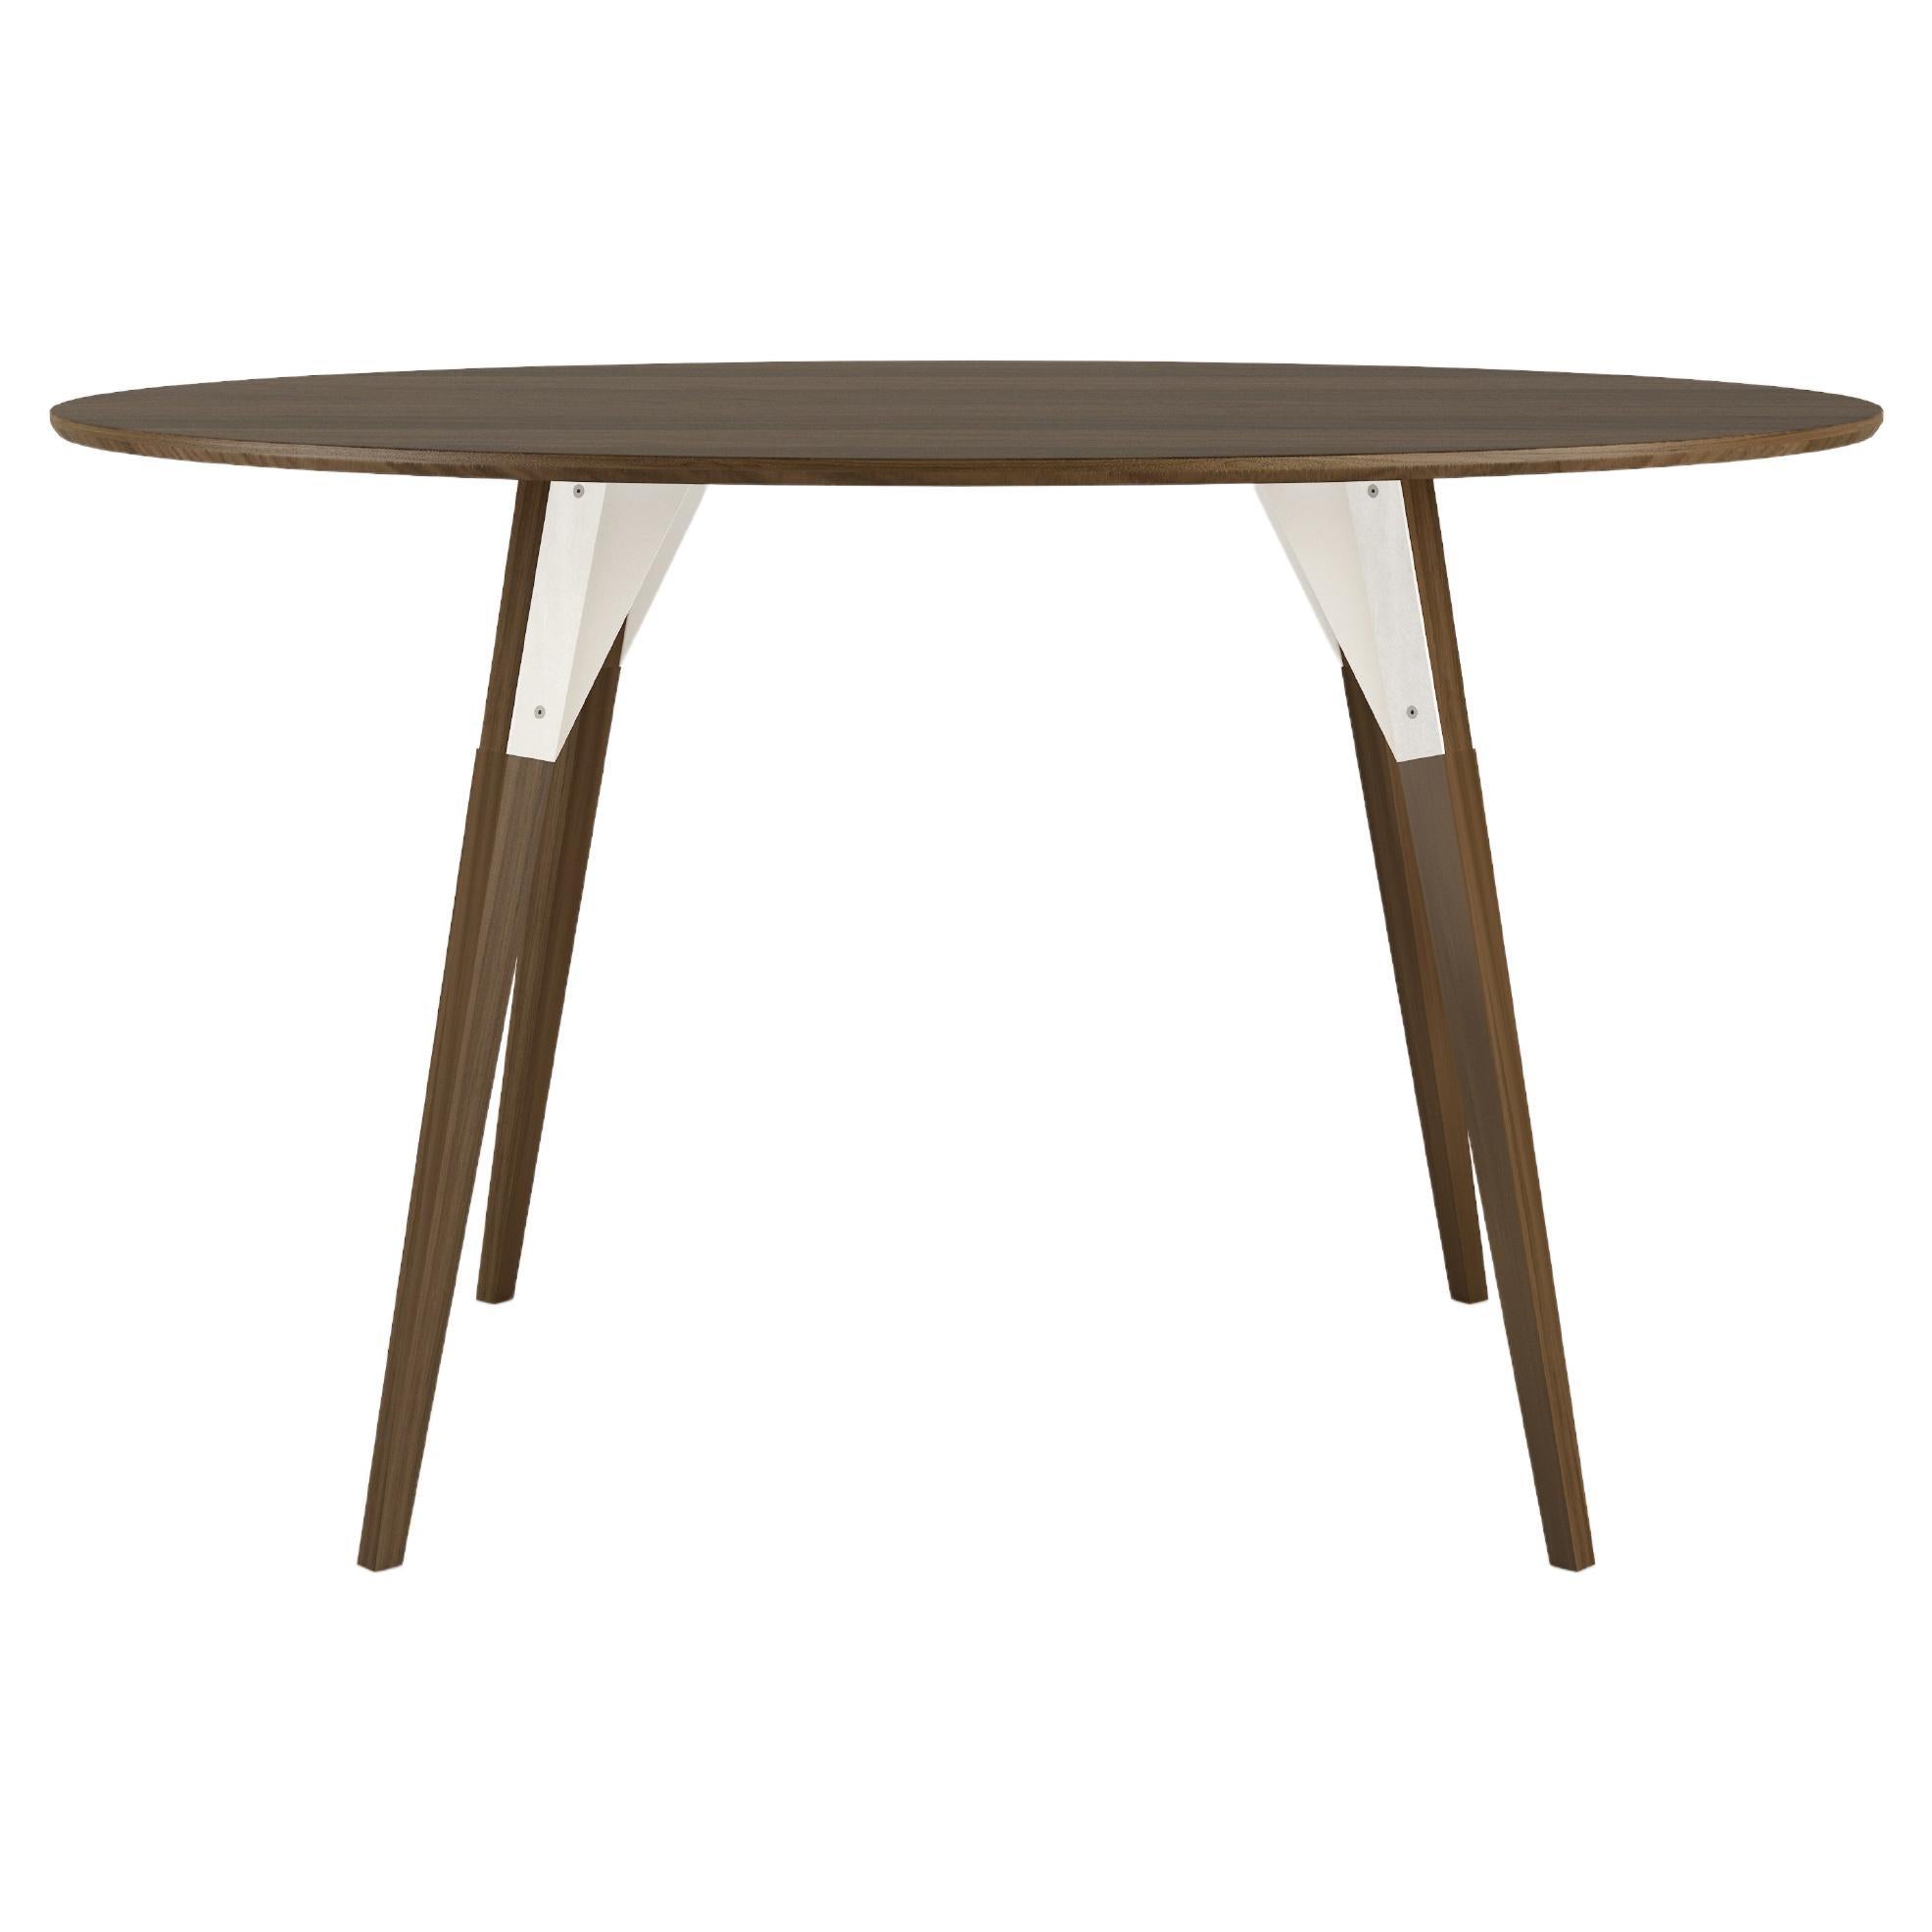 The Clarke Collection comes in ten different table top sizes, two wood species, and two metal finishes. The exposed stainless steel bolts blur the line between Scandinavian and Industrial styles.
 